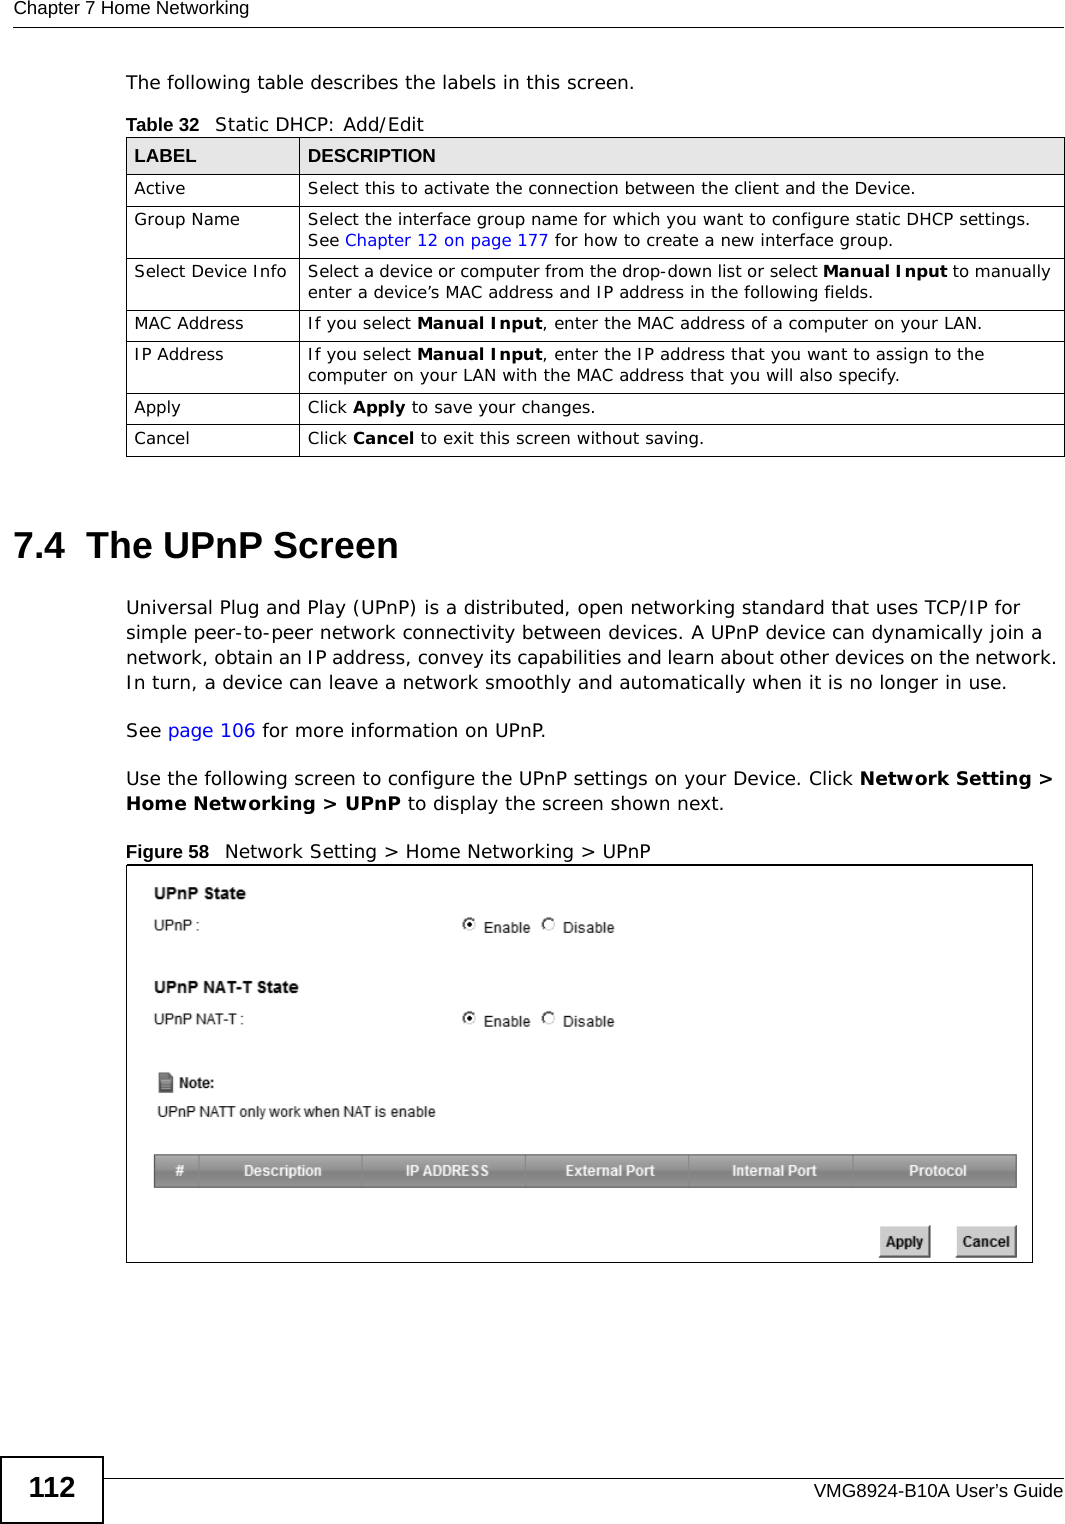 Chapter 7 Home NetworkingVMG8924-B10A User’s Guide112The following table describes the labels in this screen.7.4  The UPnP ScreenUniversal Plug and Play (UPnP) is a distributed, open networking standard that uses TCP/IP for simple peer-to-peer network connectivity between devices. A UPnP device can dynamically join a network, obtain an IP address, convey its capabilities and learn about other devices on the network. In turn, a device can leave a network smoothly and automatically when it is no longer in use.See page 106 for more information on UPnP.Use the following screen to configure the UPnP settings on your Device. Click Network Setting &gt; Home Networking &gt; UPnP to display the screen shown next.Figure 58   Network Setting &gt; Home Networking &gt; UPnPTable 32   Static DHCP: Add/EditLABEL DESCRIPTIONActive Select this to activate the connection between the client and the Device.Group Name Select the interface group name for which you want to configure static DHCP settings. See Chapter 12 on page 177 for how to create a new interface group.Select Device Info Select a device or computer from the drop-down list or select Manual Input to manually enter a device’s MAC address and IP address in the following fields.MAC Address If you select Manual Input, enter the MAC address of a computer on your LAN.IP Address If you select Manual Input, enter the IP address that you want to assign to the computer on your LAN with the MAC address that you will also specify.Apply Click Apply to save your changes.Cancel Click Cancel to exit this screen without saving.